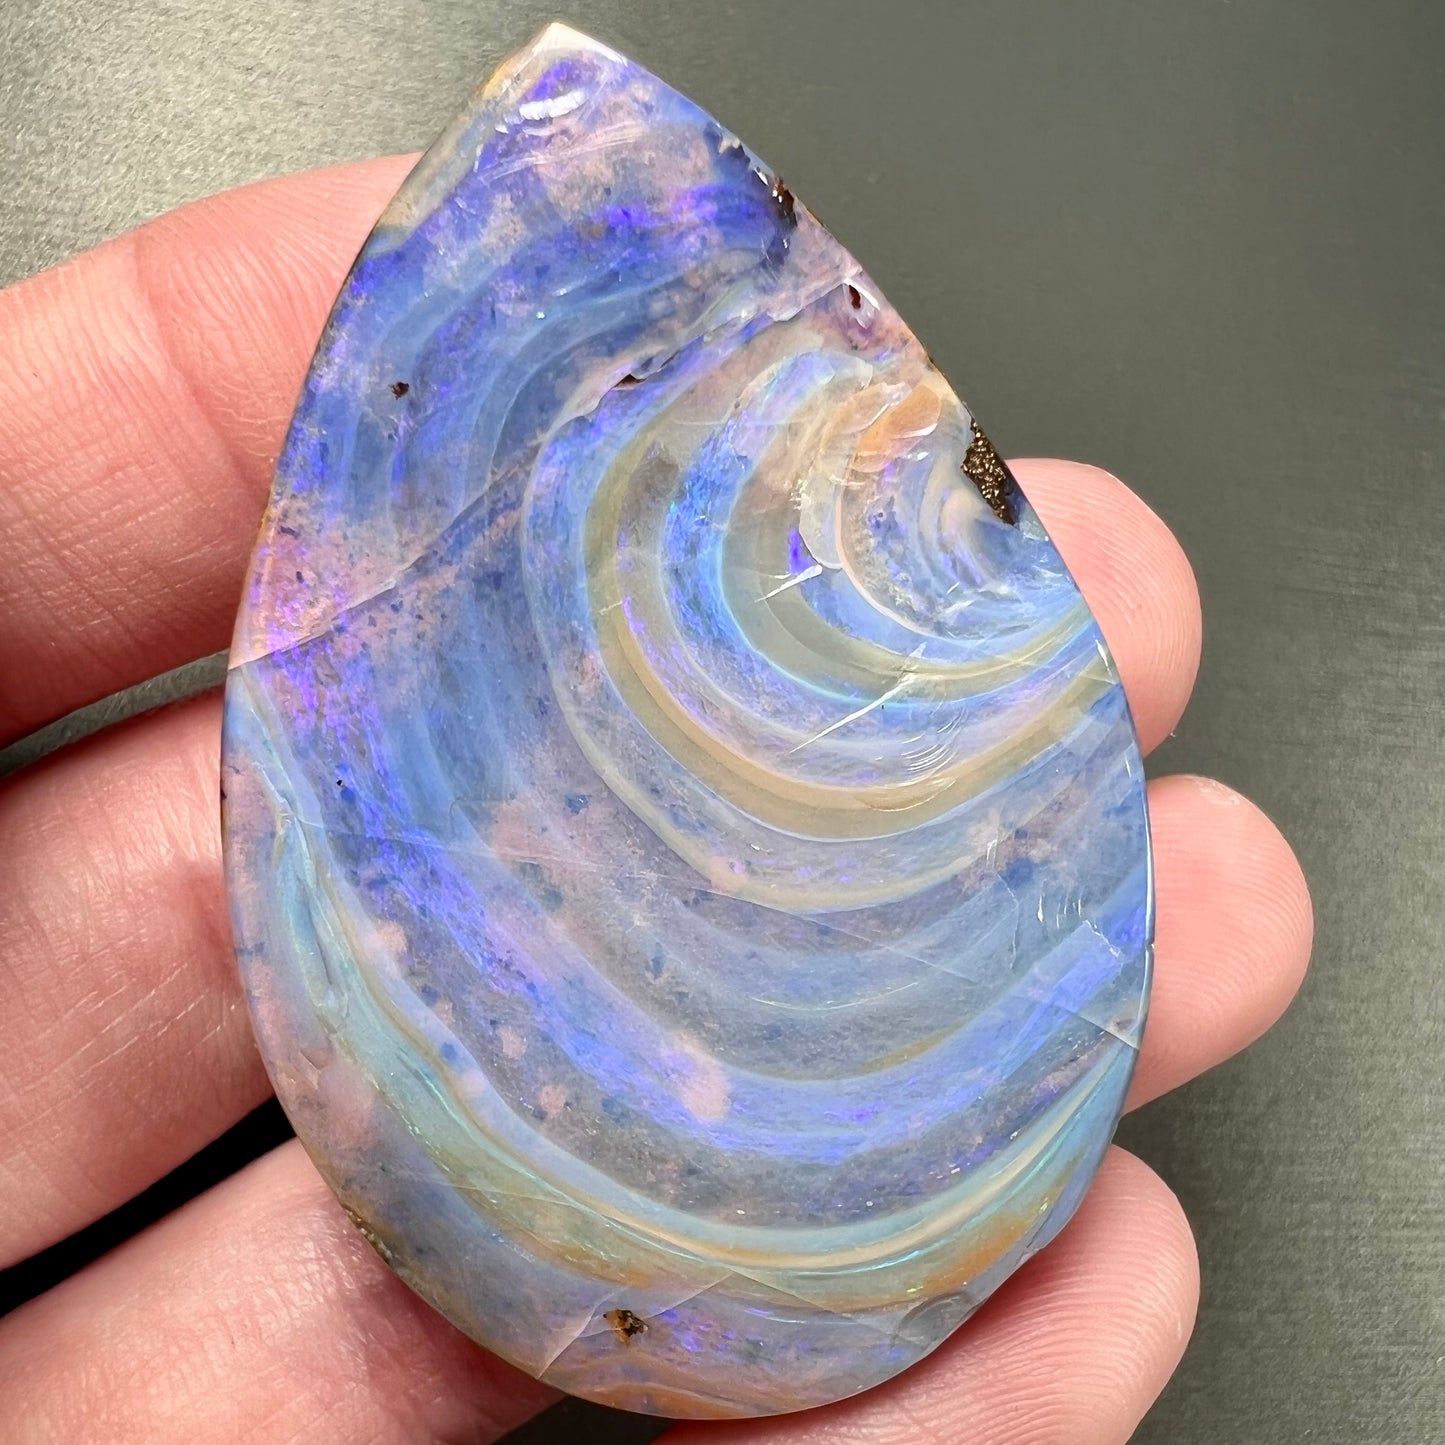 A loose, polished Quilpie boulder opal stone from Queensland, Australia.  The opal displays a blue flow pattern.